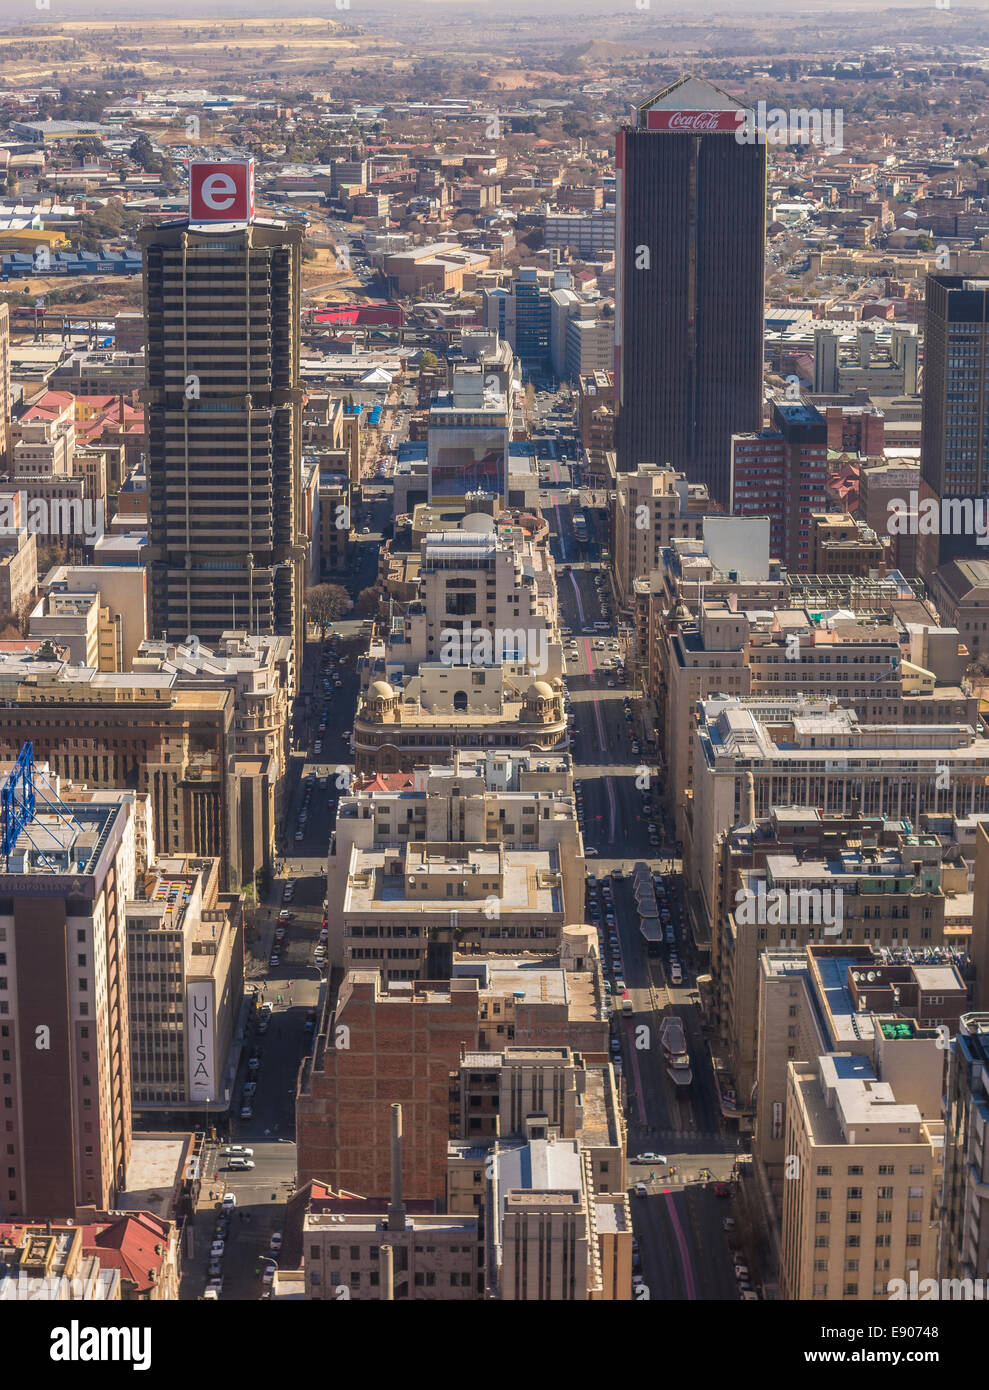 JOHANNESBURG, SOUTH AFRICA - Skyscrapers and buildings in central business district. Aerial view to west from top Carlton Centre Stock Photo